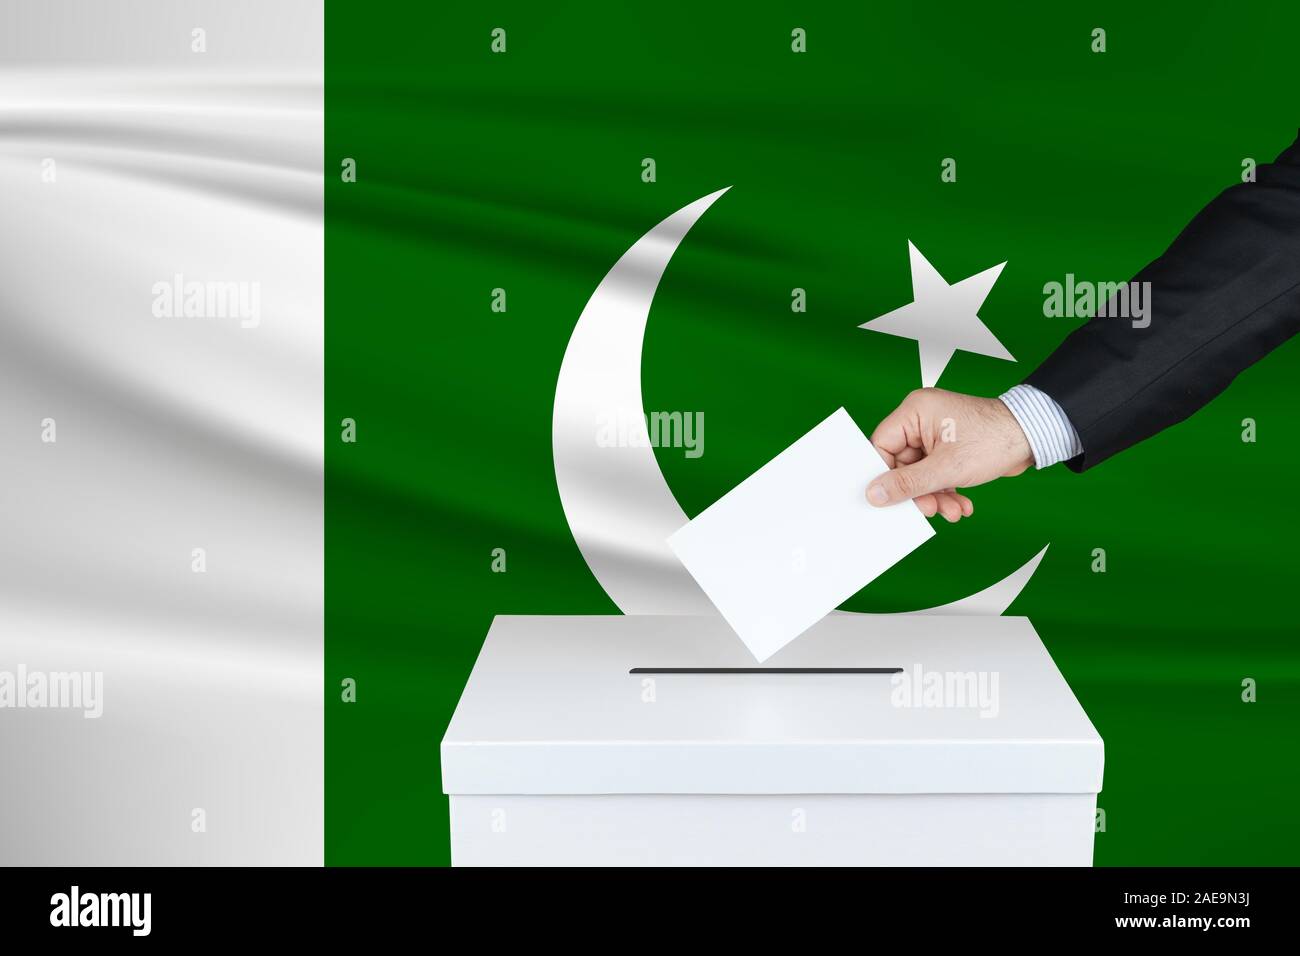 Election in Pakistan. The hand of man putting his vote in the ballot box. Waved Pakistan flag on background. Stock Photo